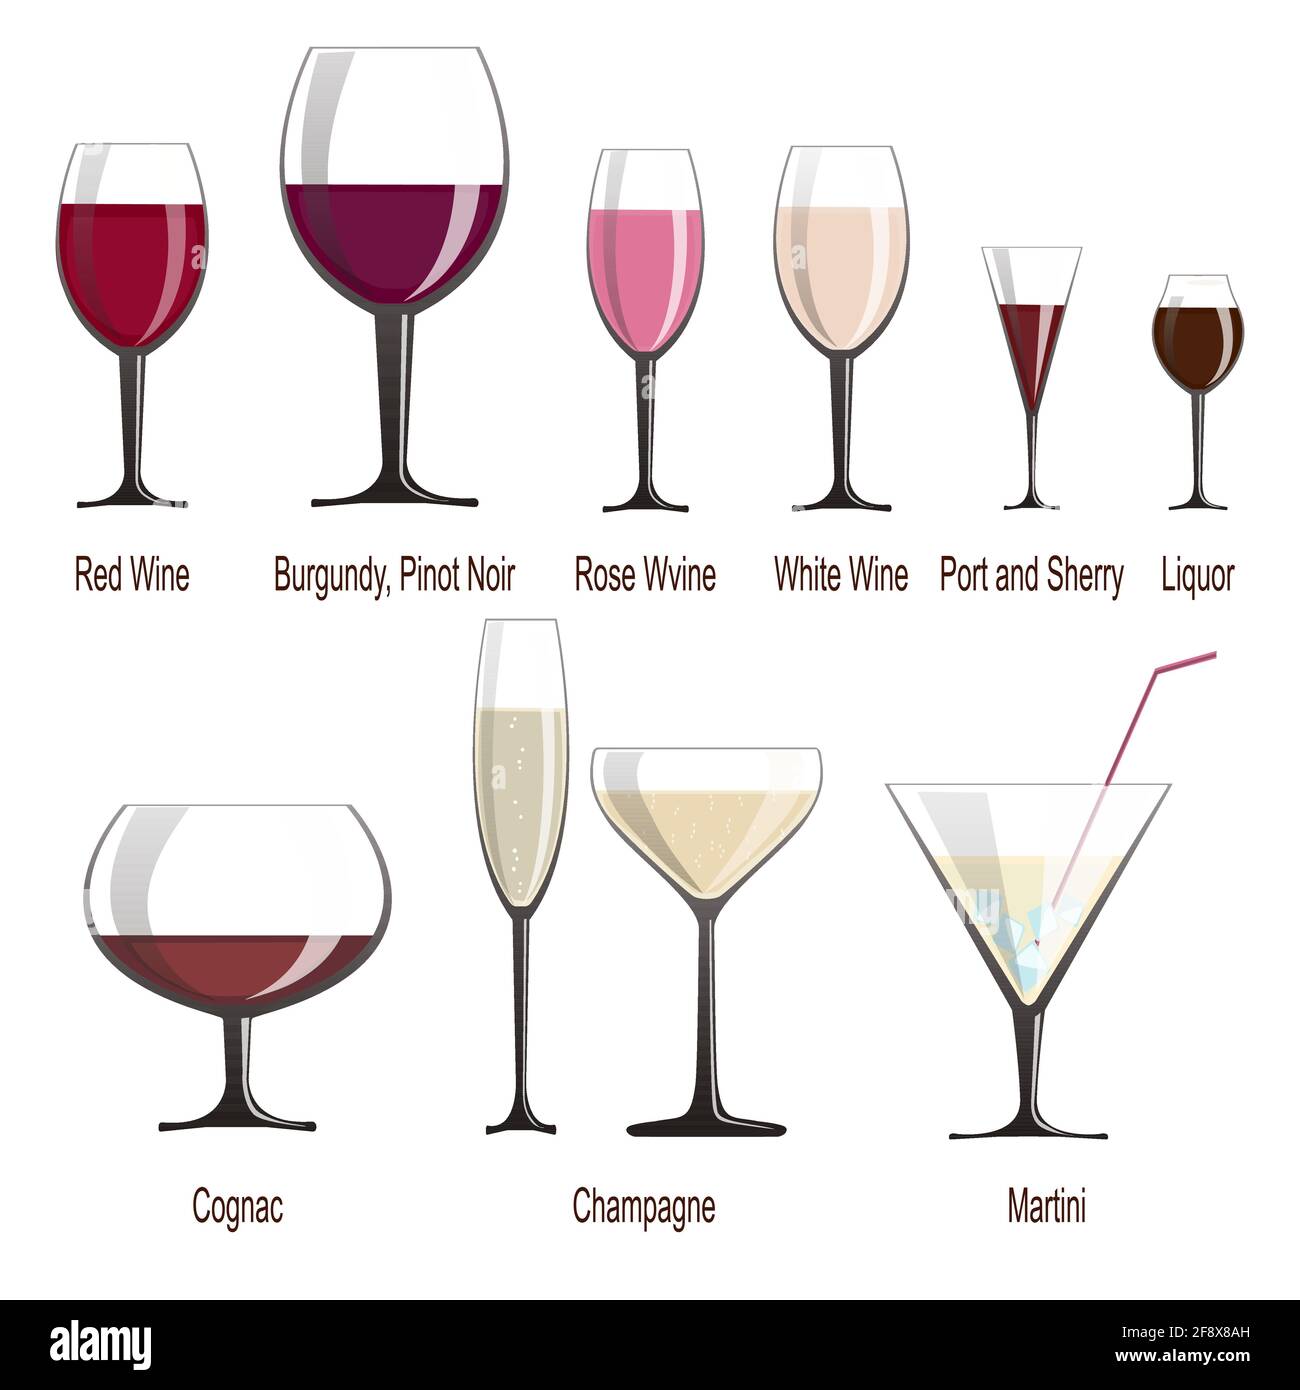 https://c8.alamy.com/comp/2F8X8AH/a-set-of-glasses-of-different-shapes-with-a-variety-of-wines-and-light-alcoholic-beverages-names-for-proper-serving-2F8X8AH.jpg